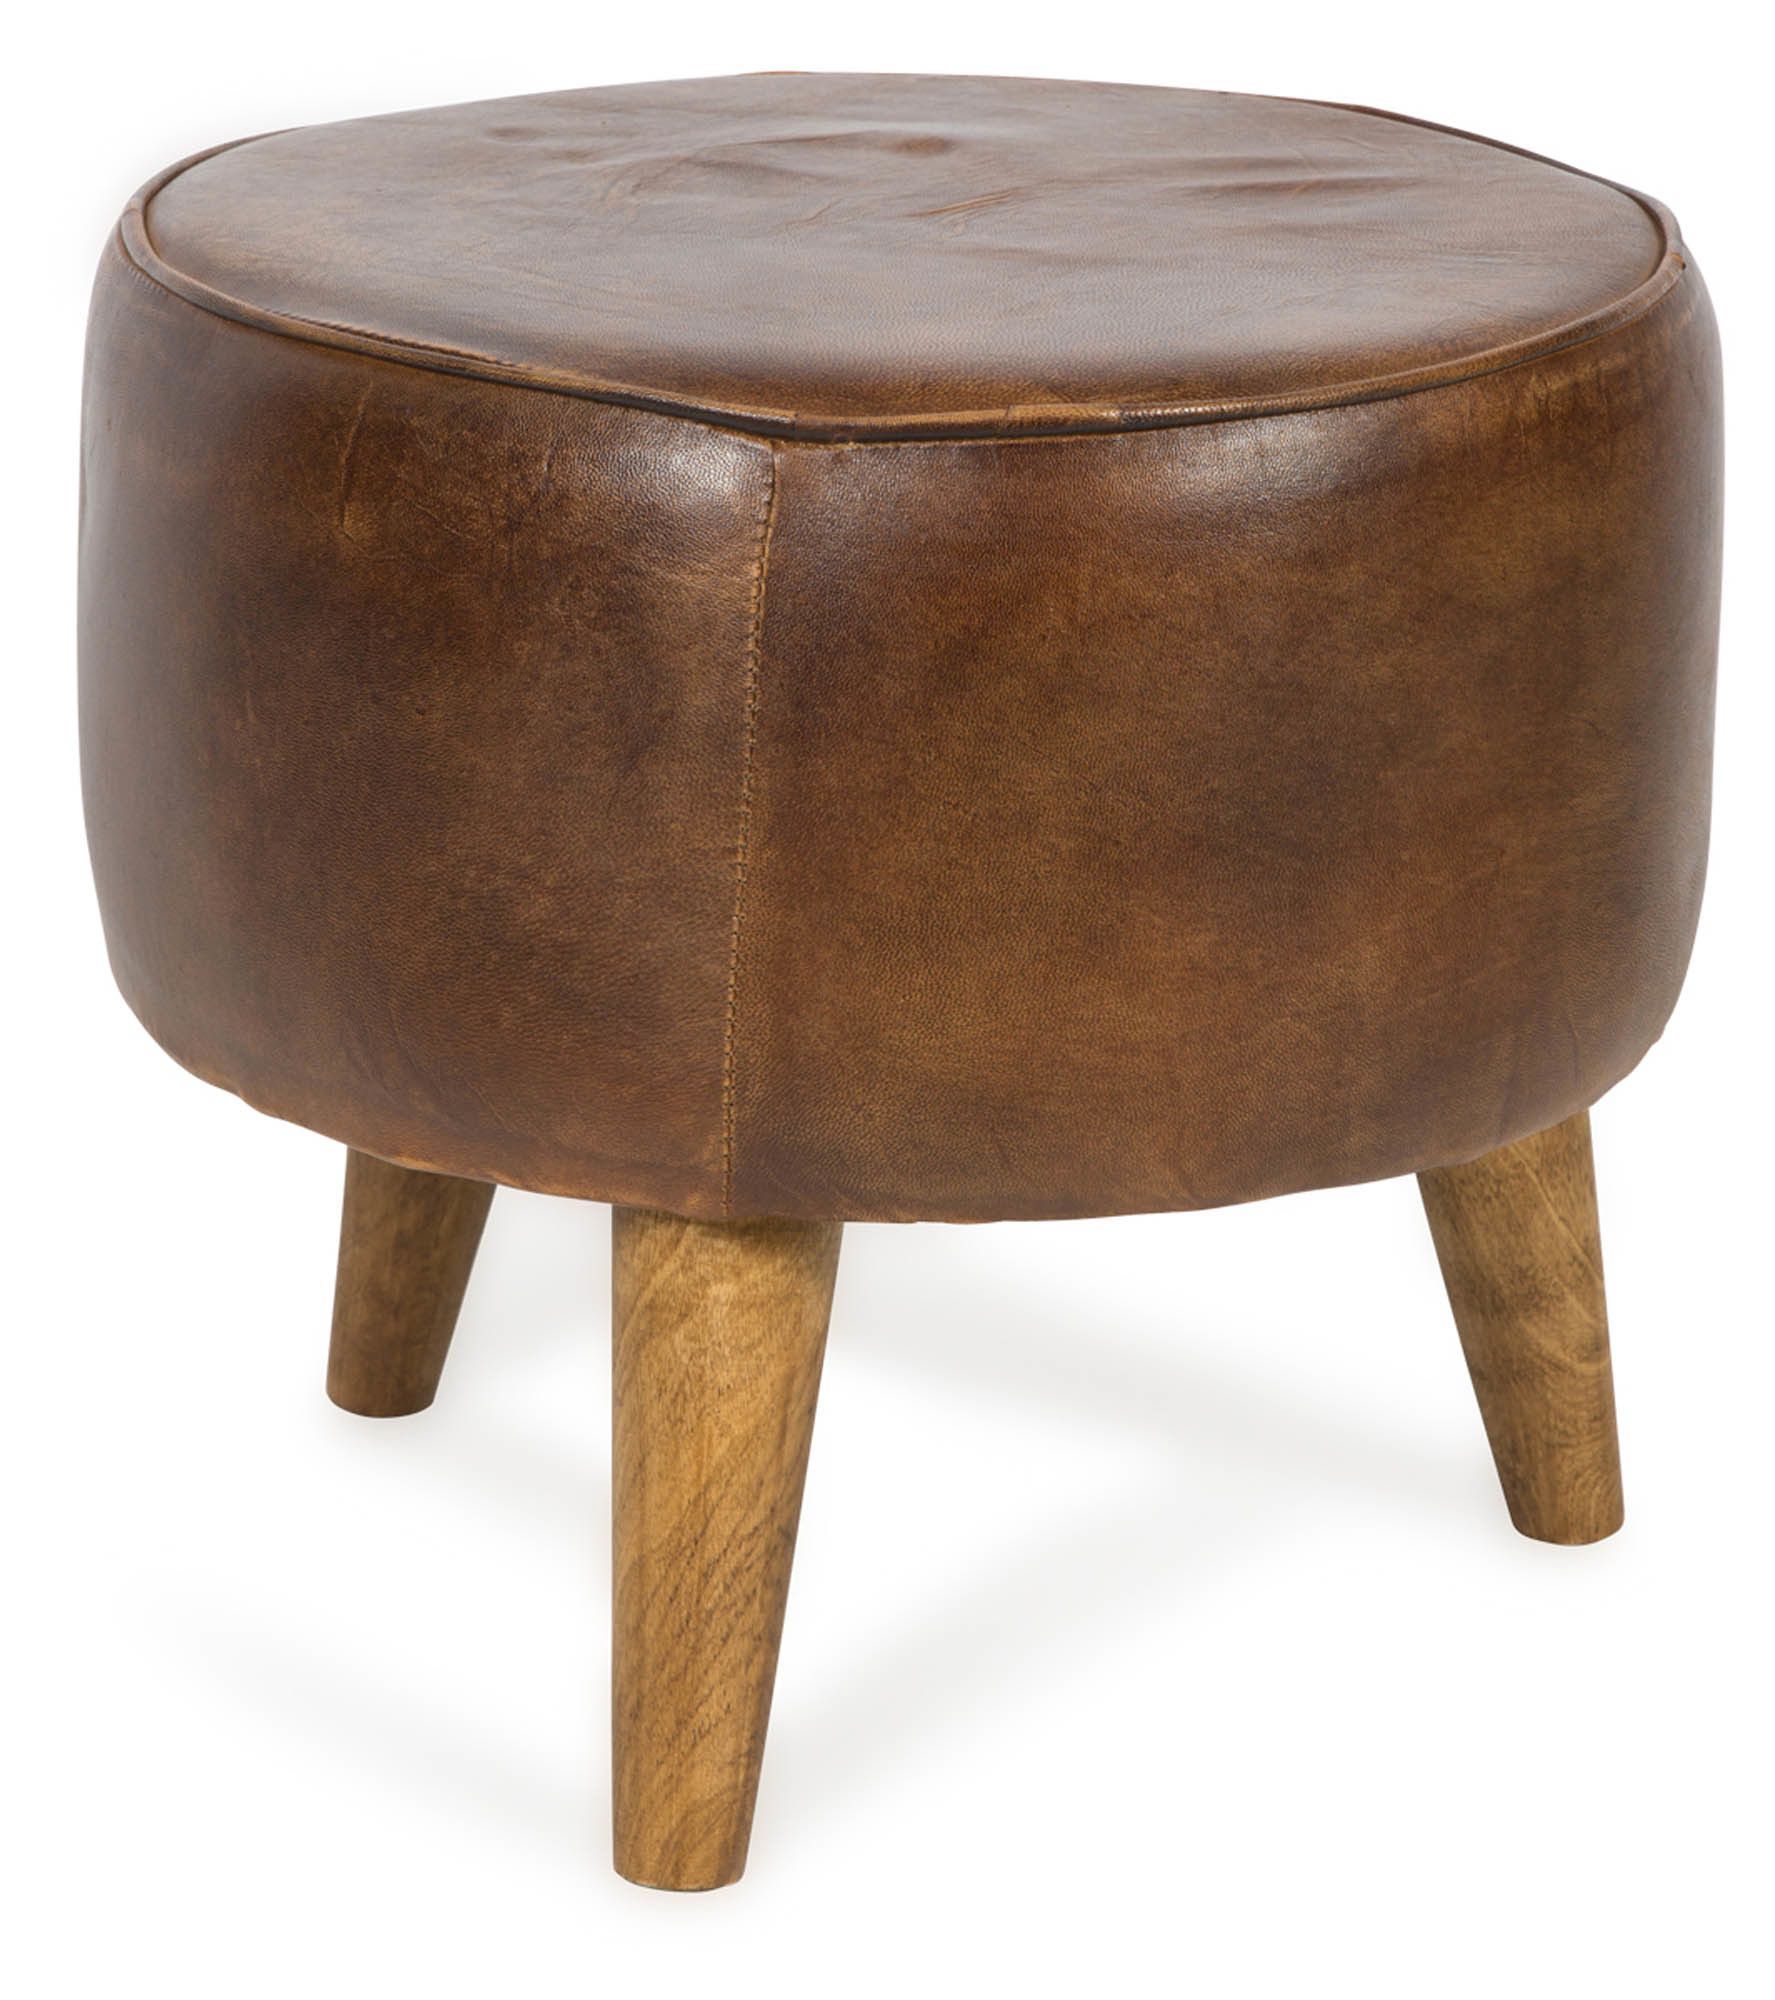 Round Leather Ottoman Stool | Round Leather Ottoman, Leather Ottoman Intended For Brown And Ivory Leather Hide Round Ottomans (View 17 of 20)